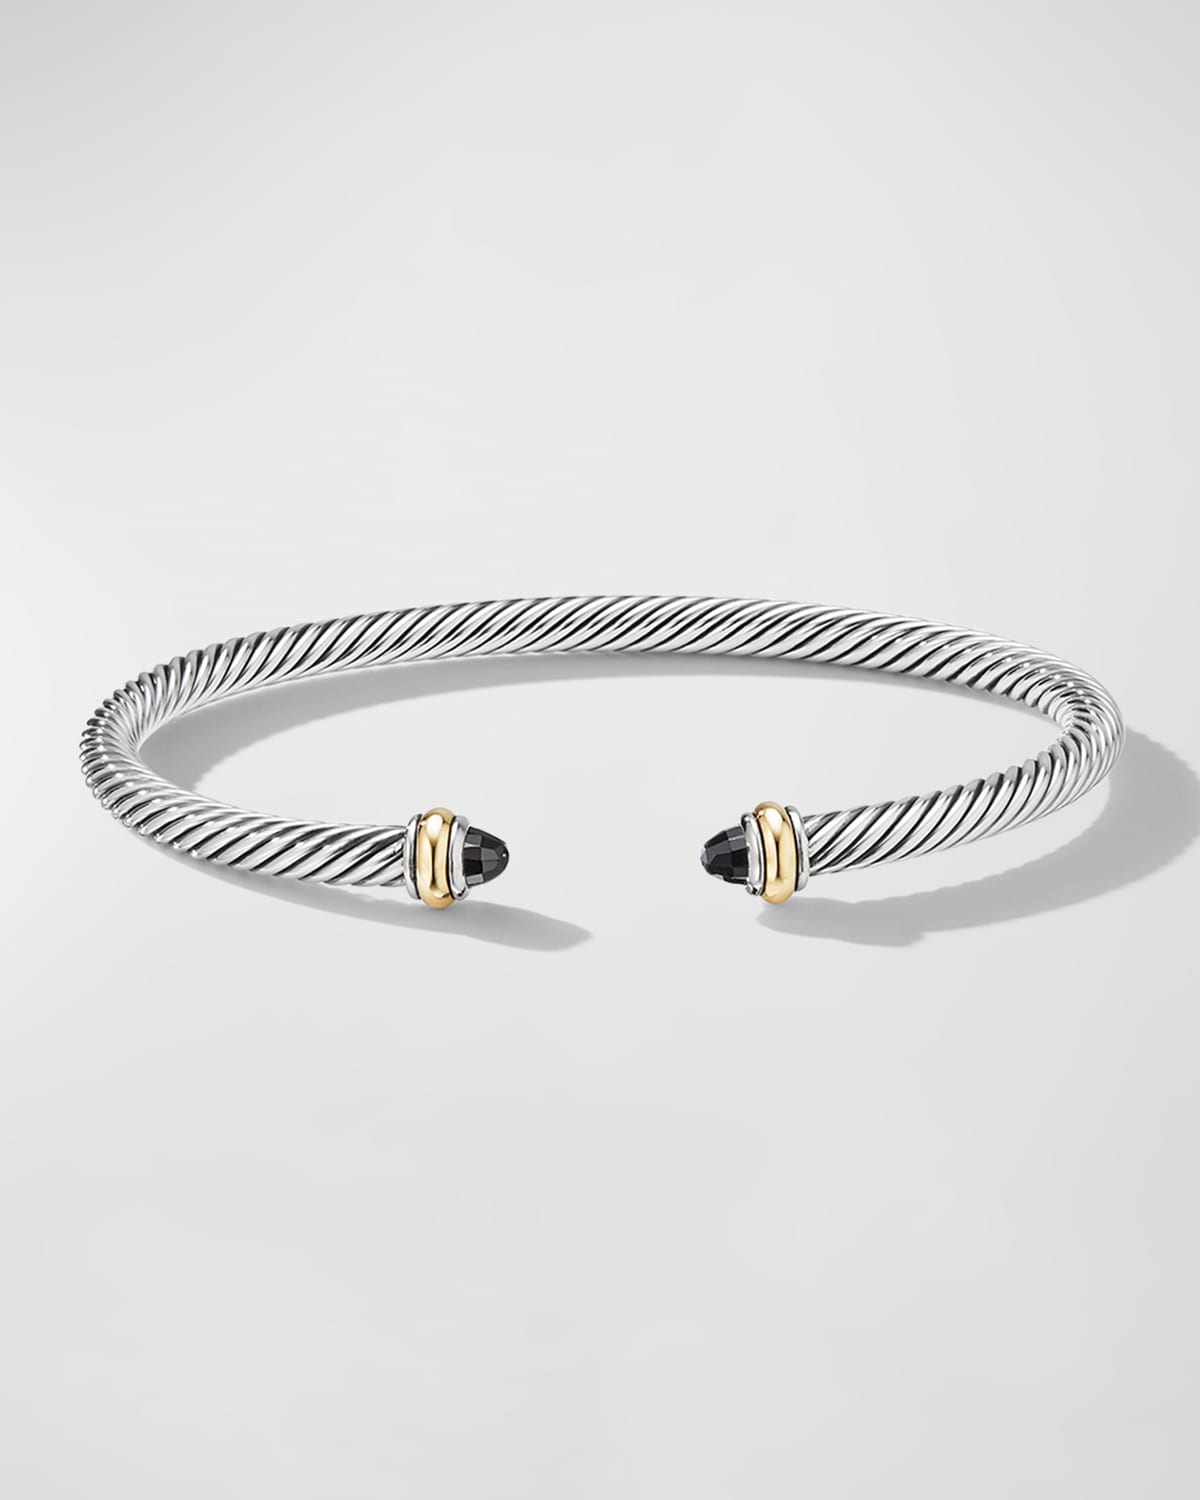 DAVID YURMAN CABLE BRACELET WITH GEMSTONE IN SILVER WITH 18K GOLD, 4MM,PROD221910019